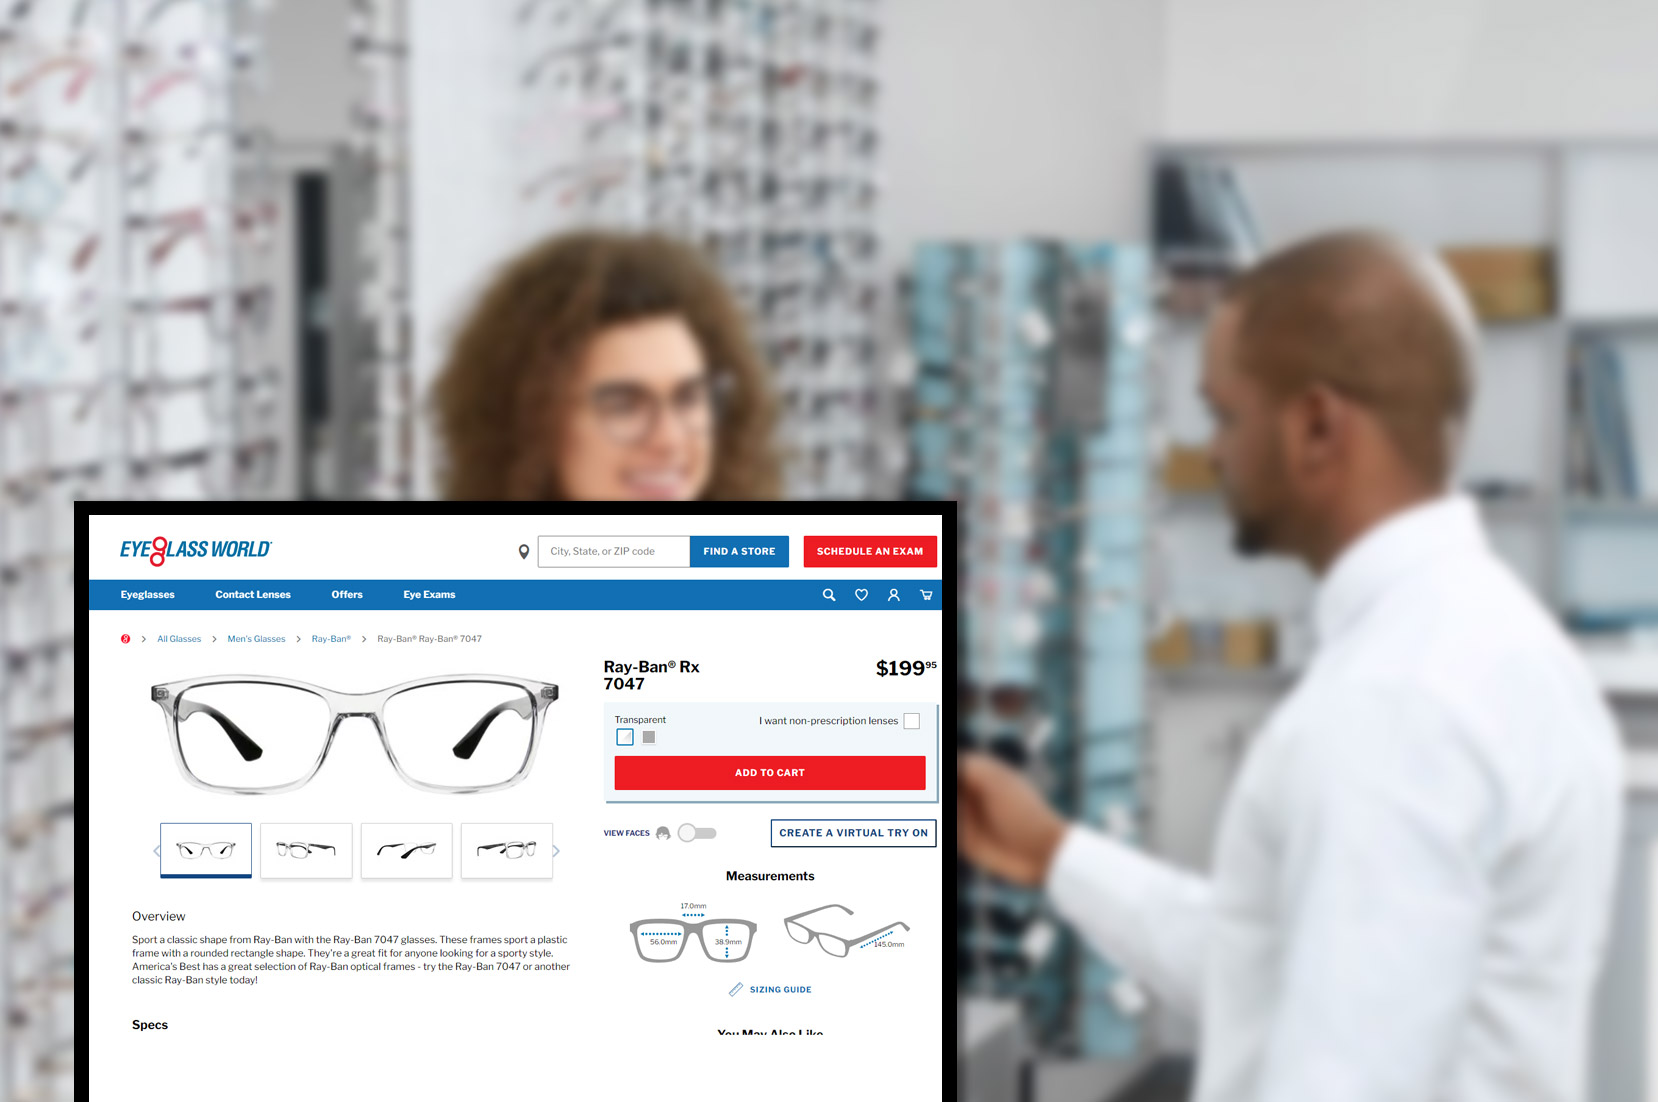 eyeglassworld-comproduct-pricing-information-and-image-scraping-services